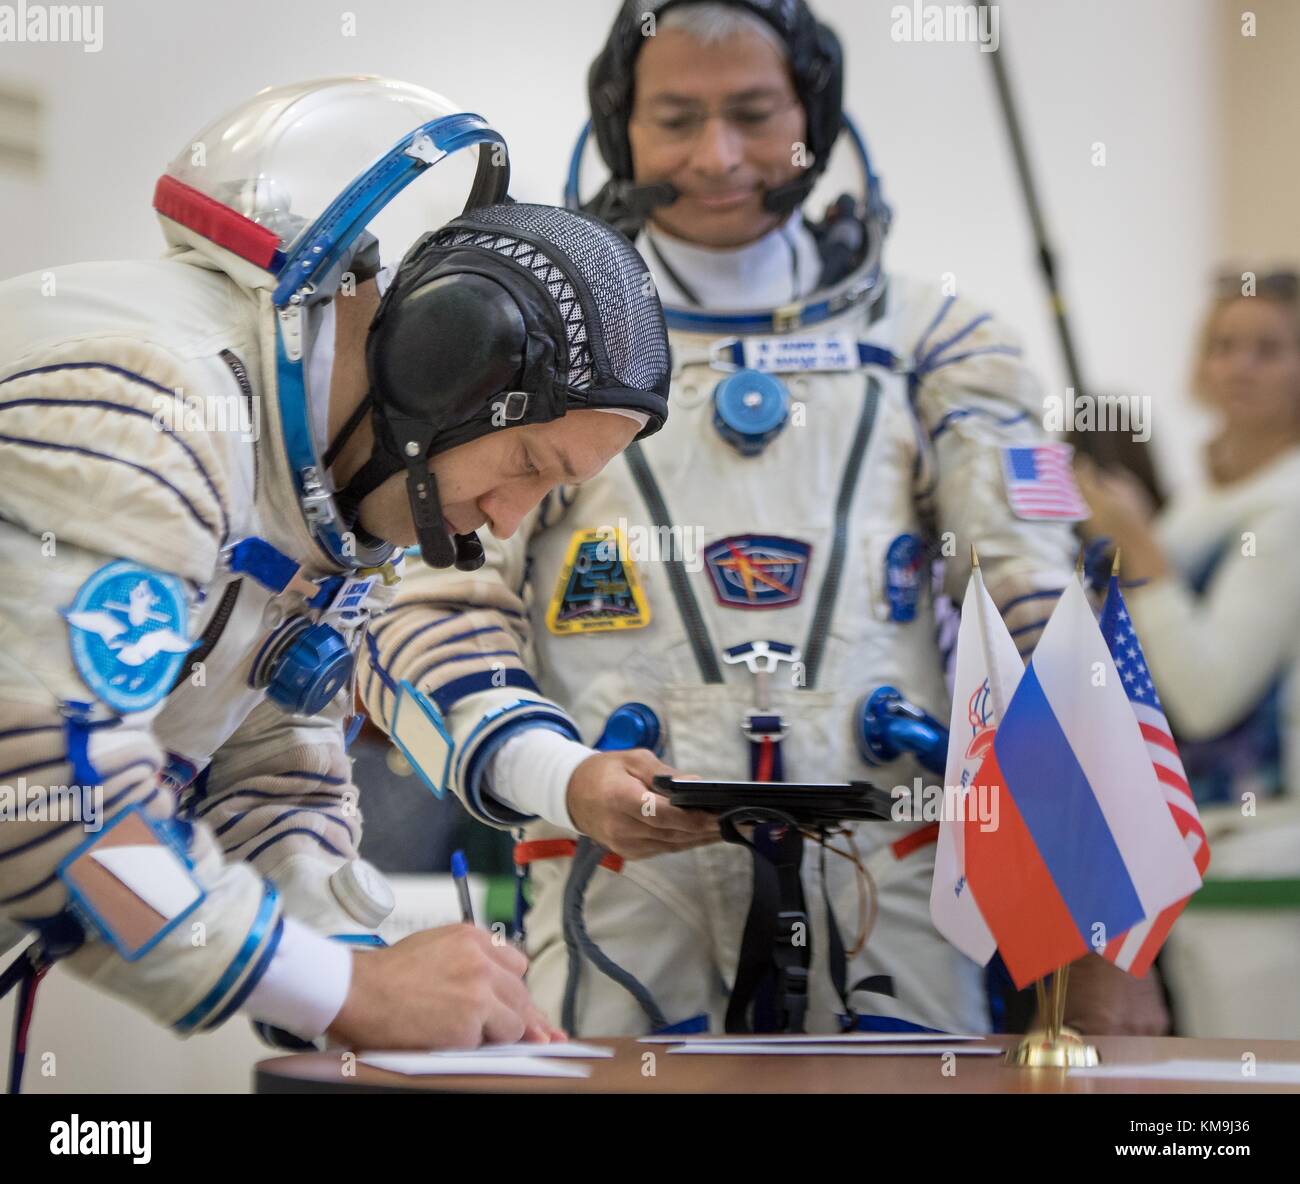 NASA International Space Station (ISS) Expedition 53 prime crew members Russian cosmonaut Alexander Misurkin of Roscosmos (left) and American astronaut Mark Vande Hei sign documents before starting their pre-launch Soyuz qualification exams in their Sokol launch and entry spacesuits prior to the Soyuz MS-06 spacecraft launch at the Gagarin Cosmonaut Training Center August 31, 2017 in Star City, Russia.   (photo by Bill Ingalls  via Planetpix) Stock Photo